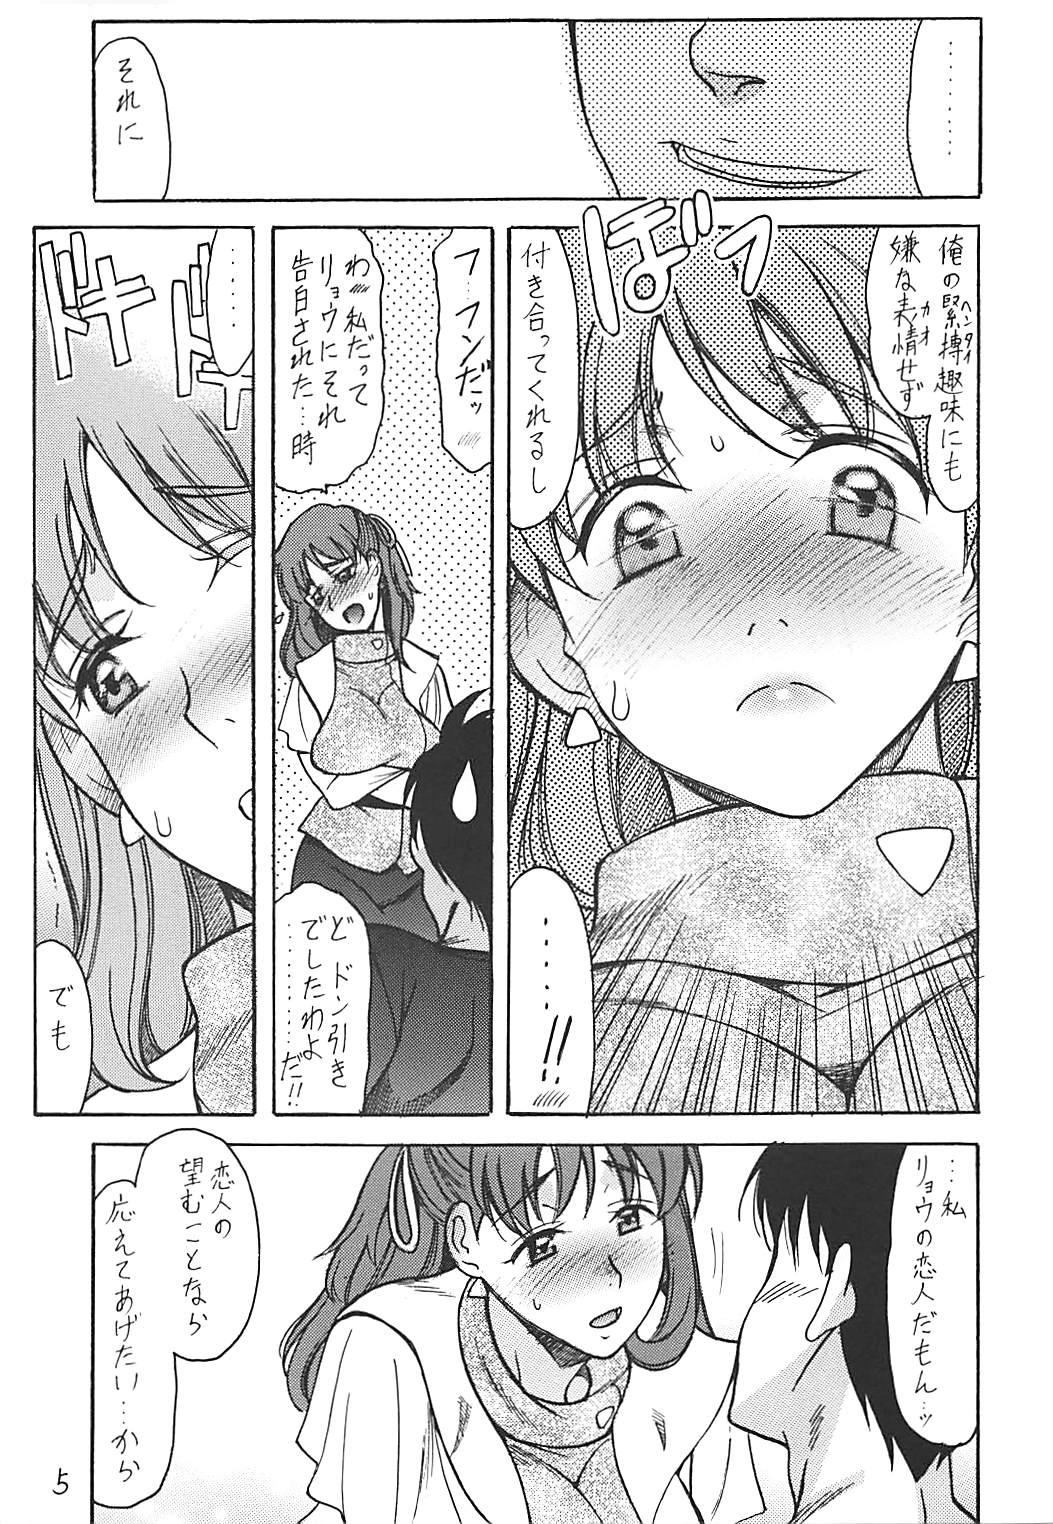 Stepsister Anice ni Omakase - Sonic soldier borgman Sex - Page 4